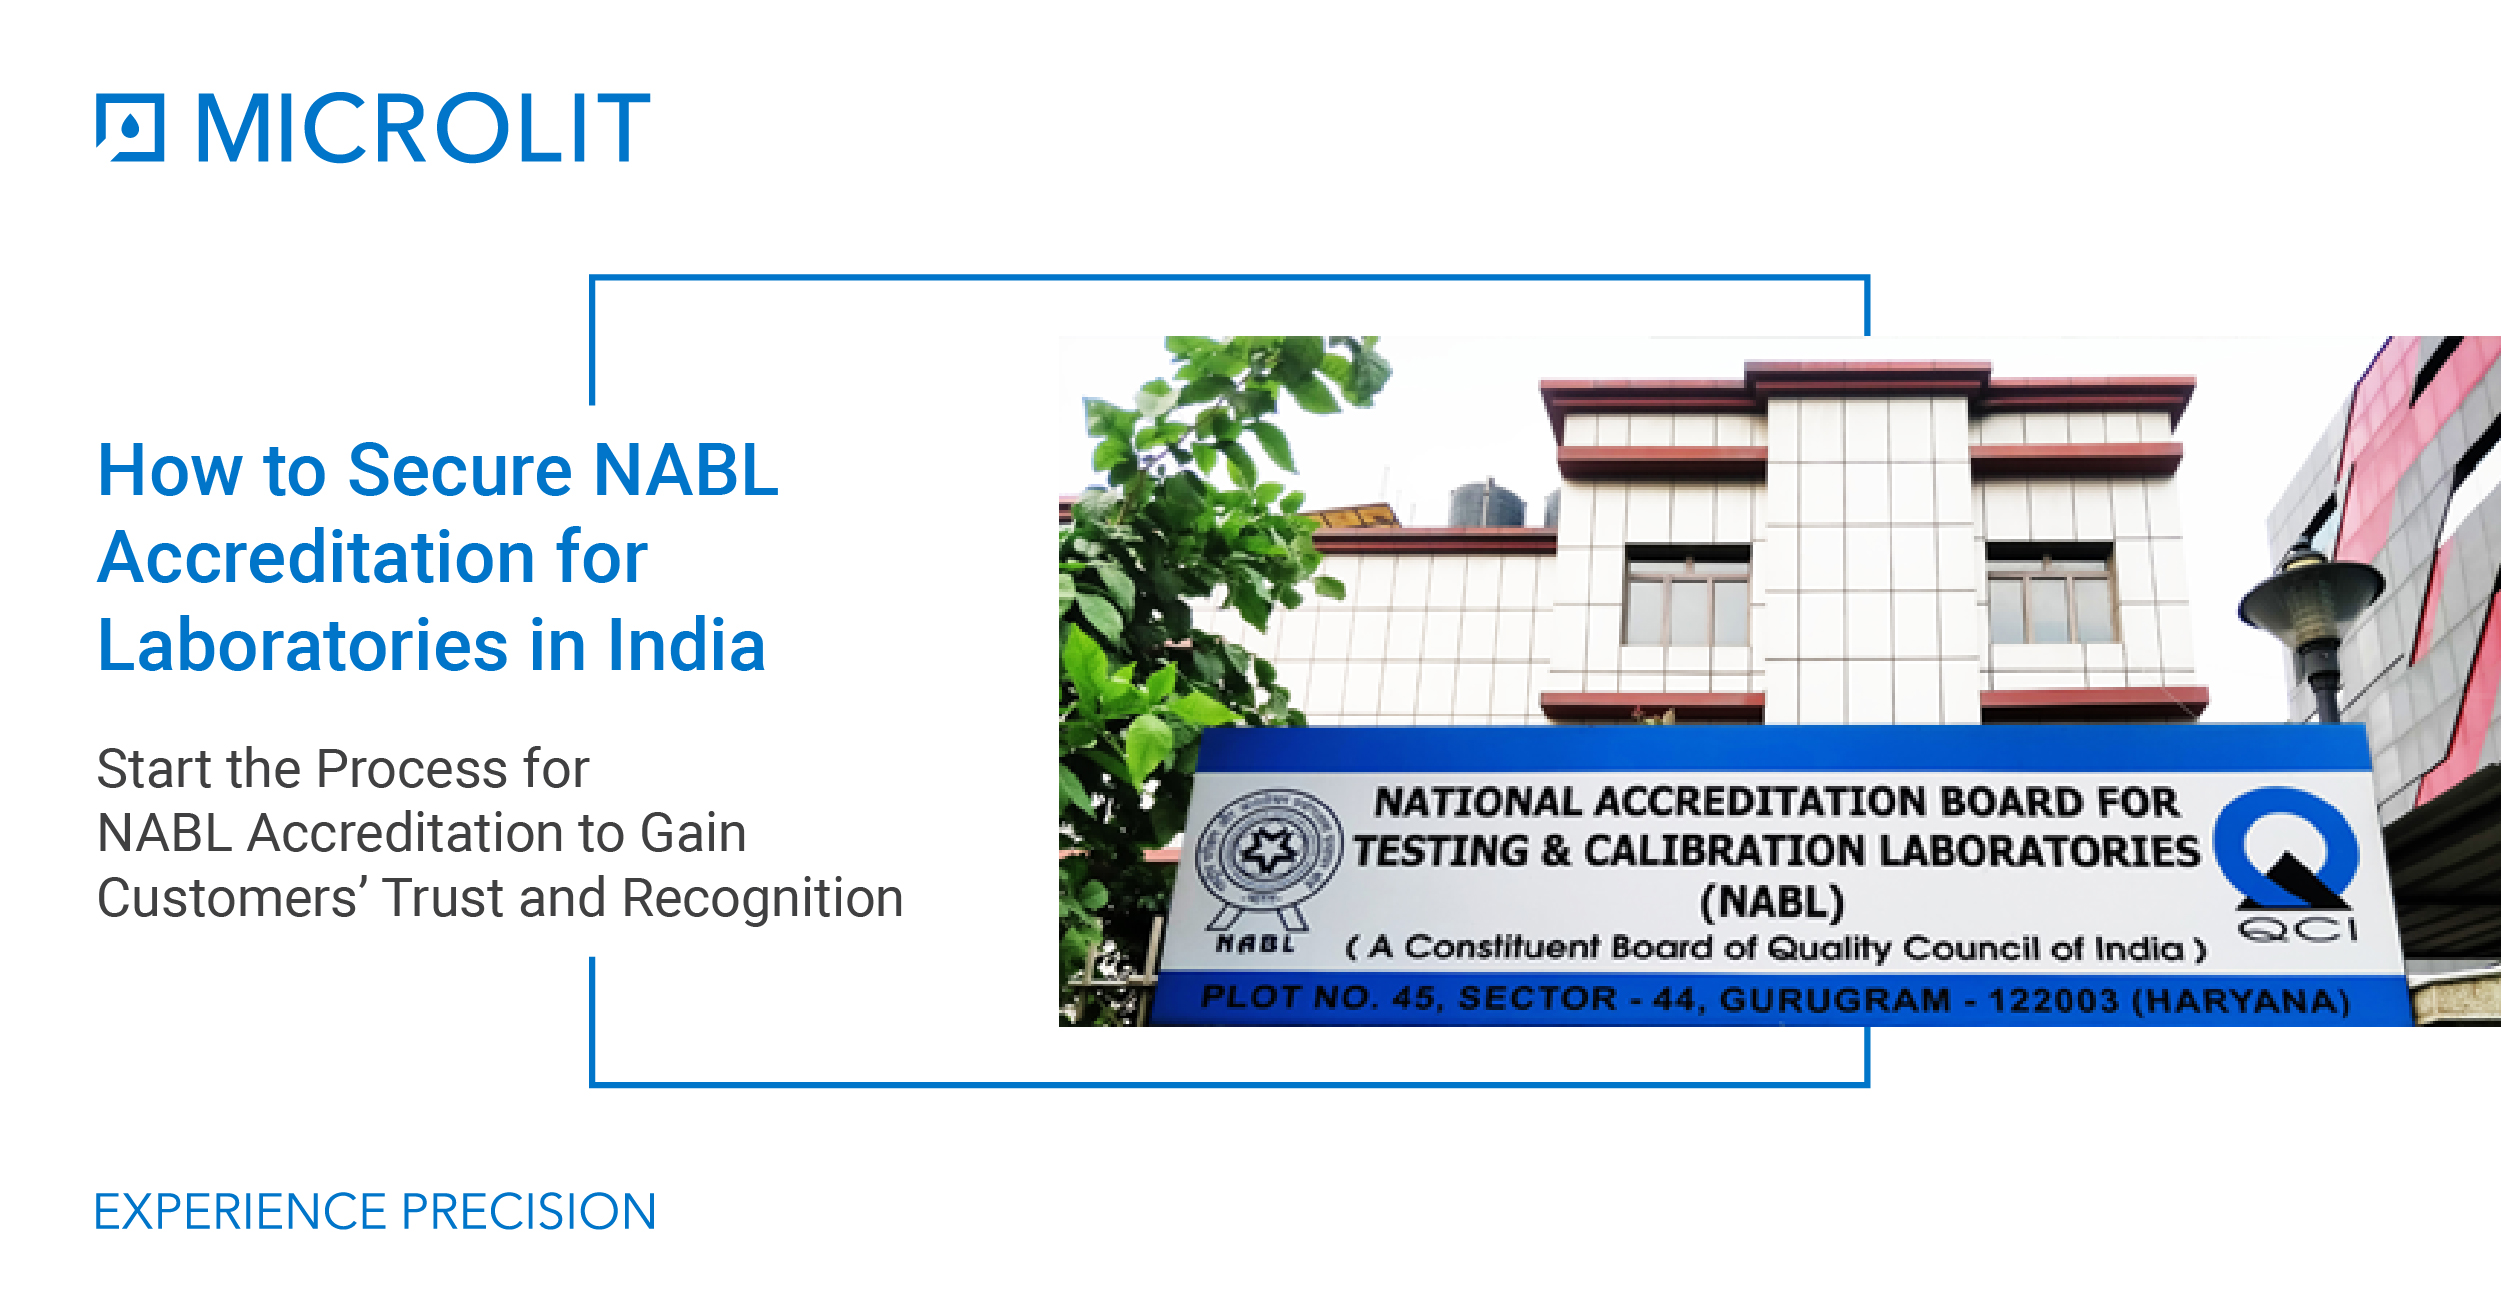 How to Secure NABL Accreditation for Laboratories in India?